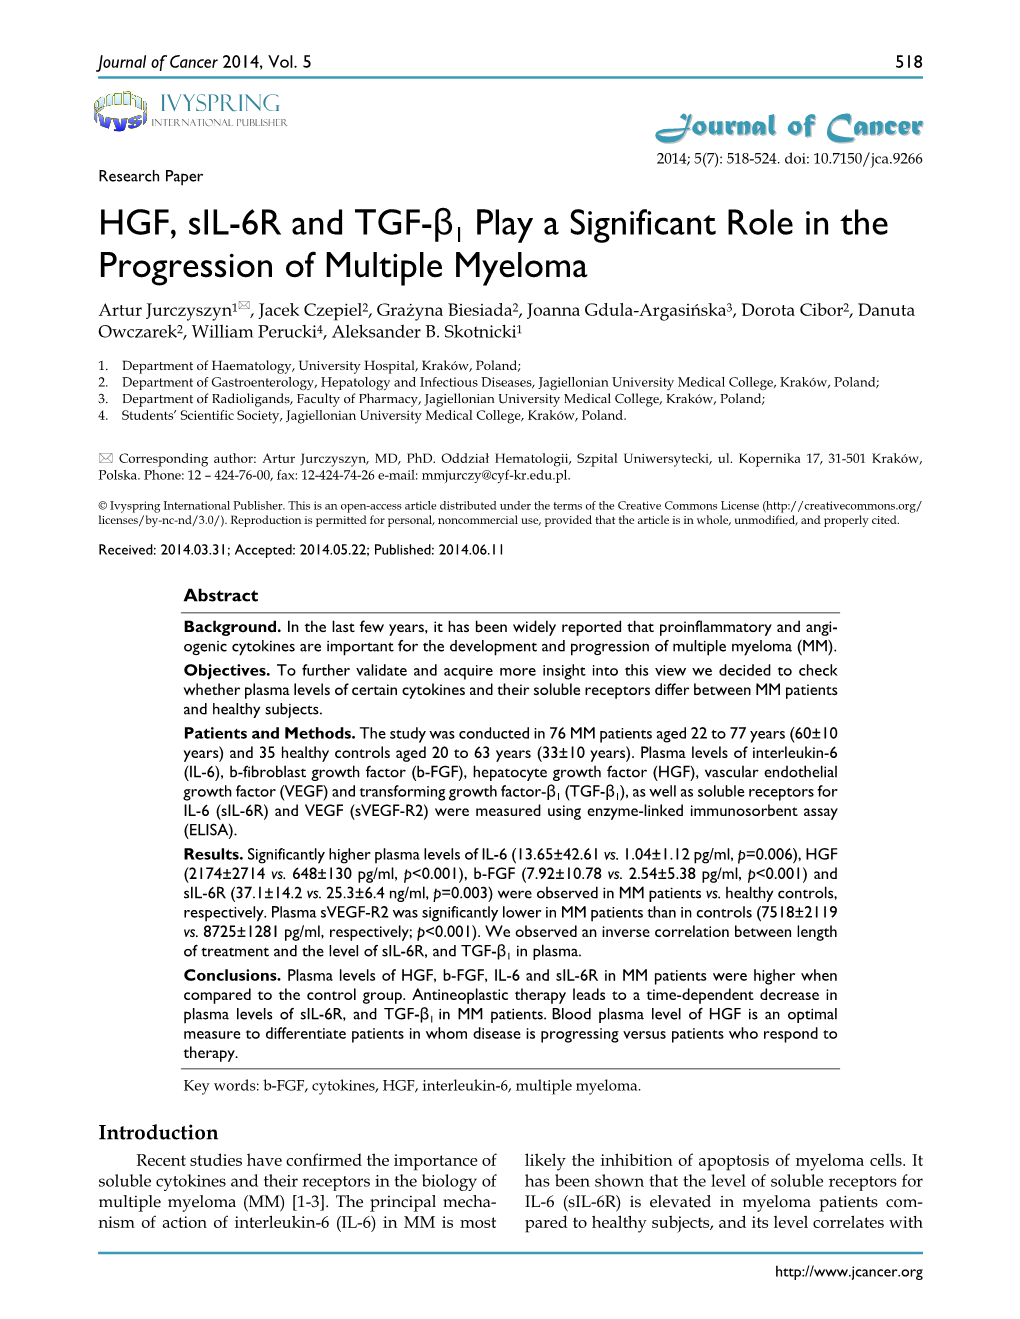 HGF, Sil-6R and TGF-Β1 Play a Significant Role in the Progression